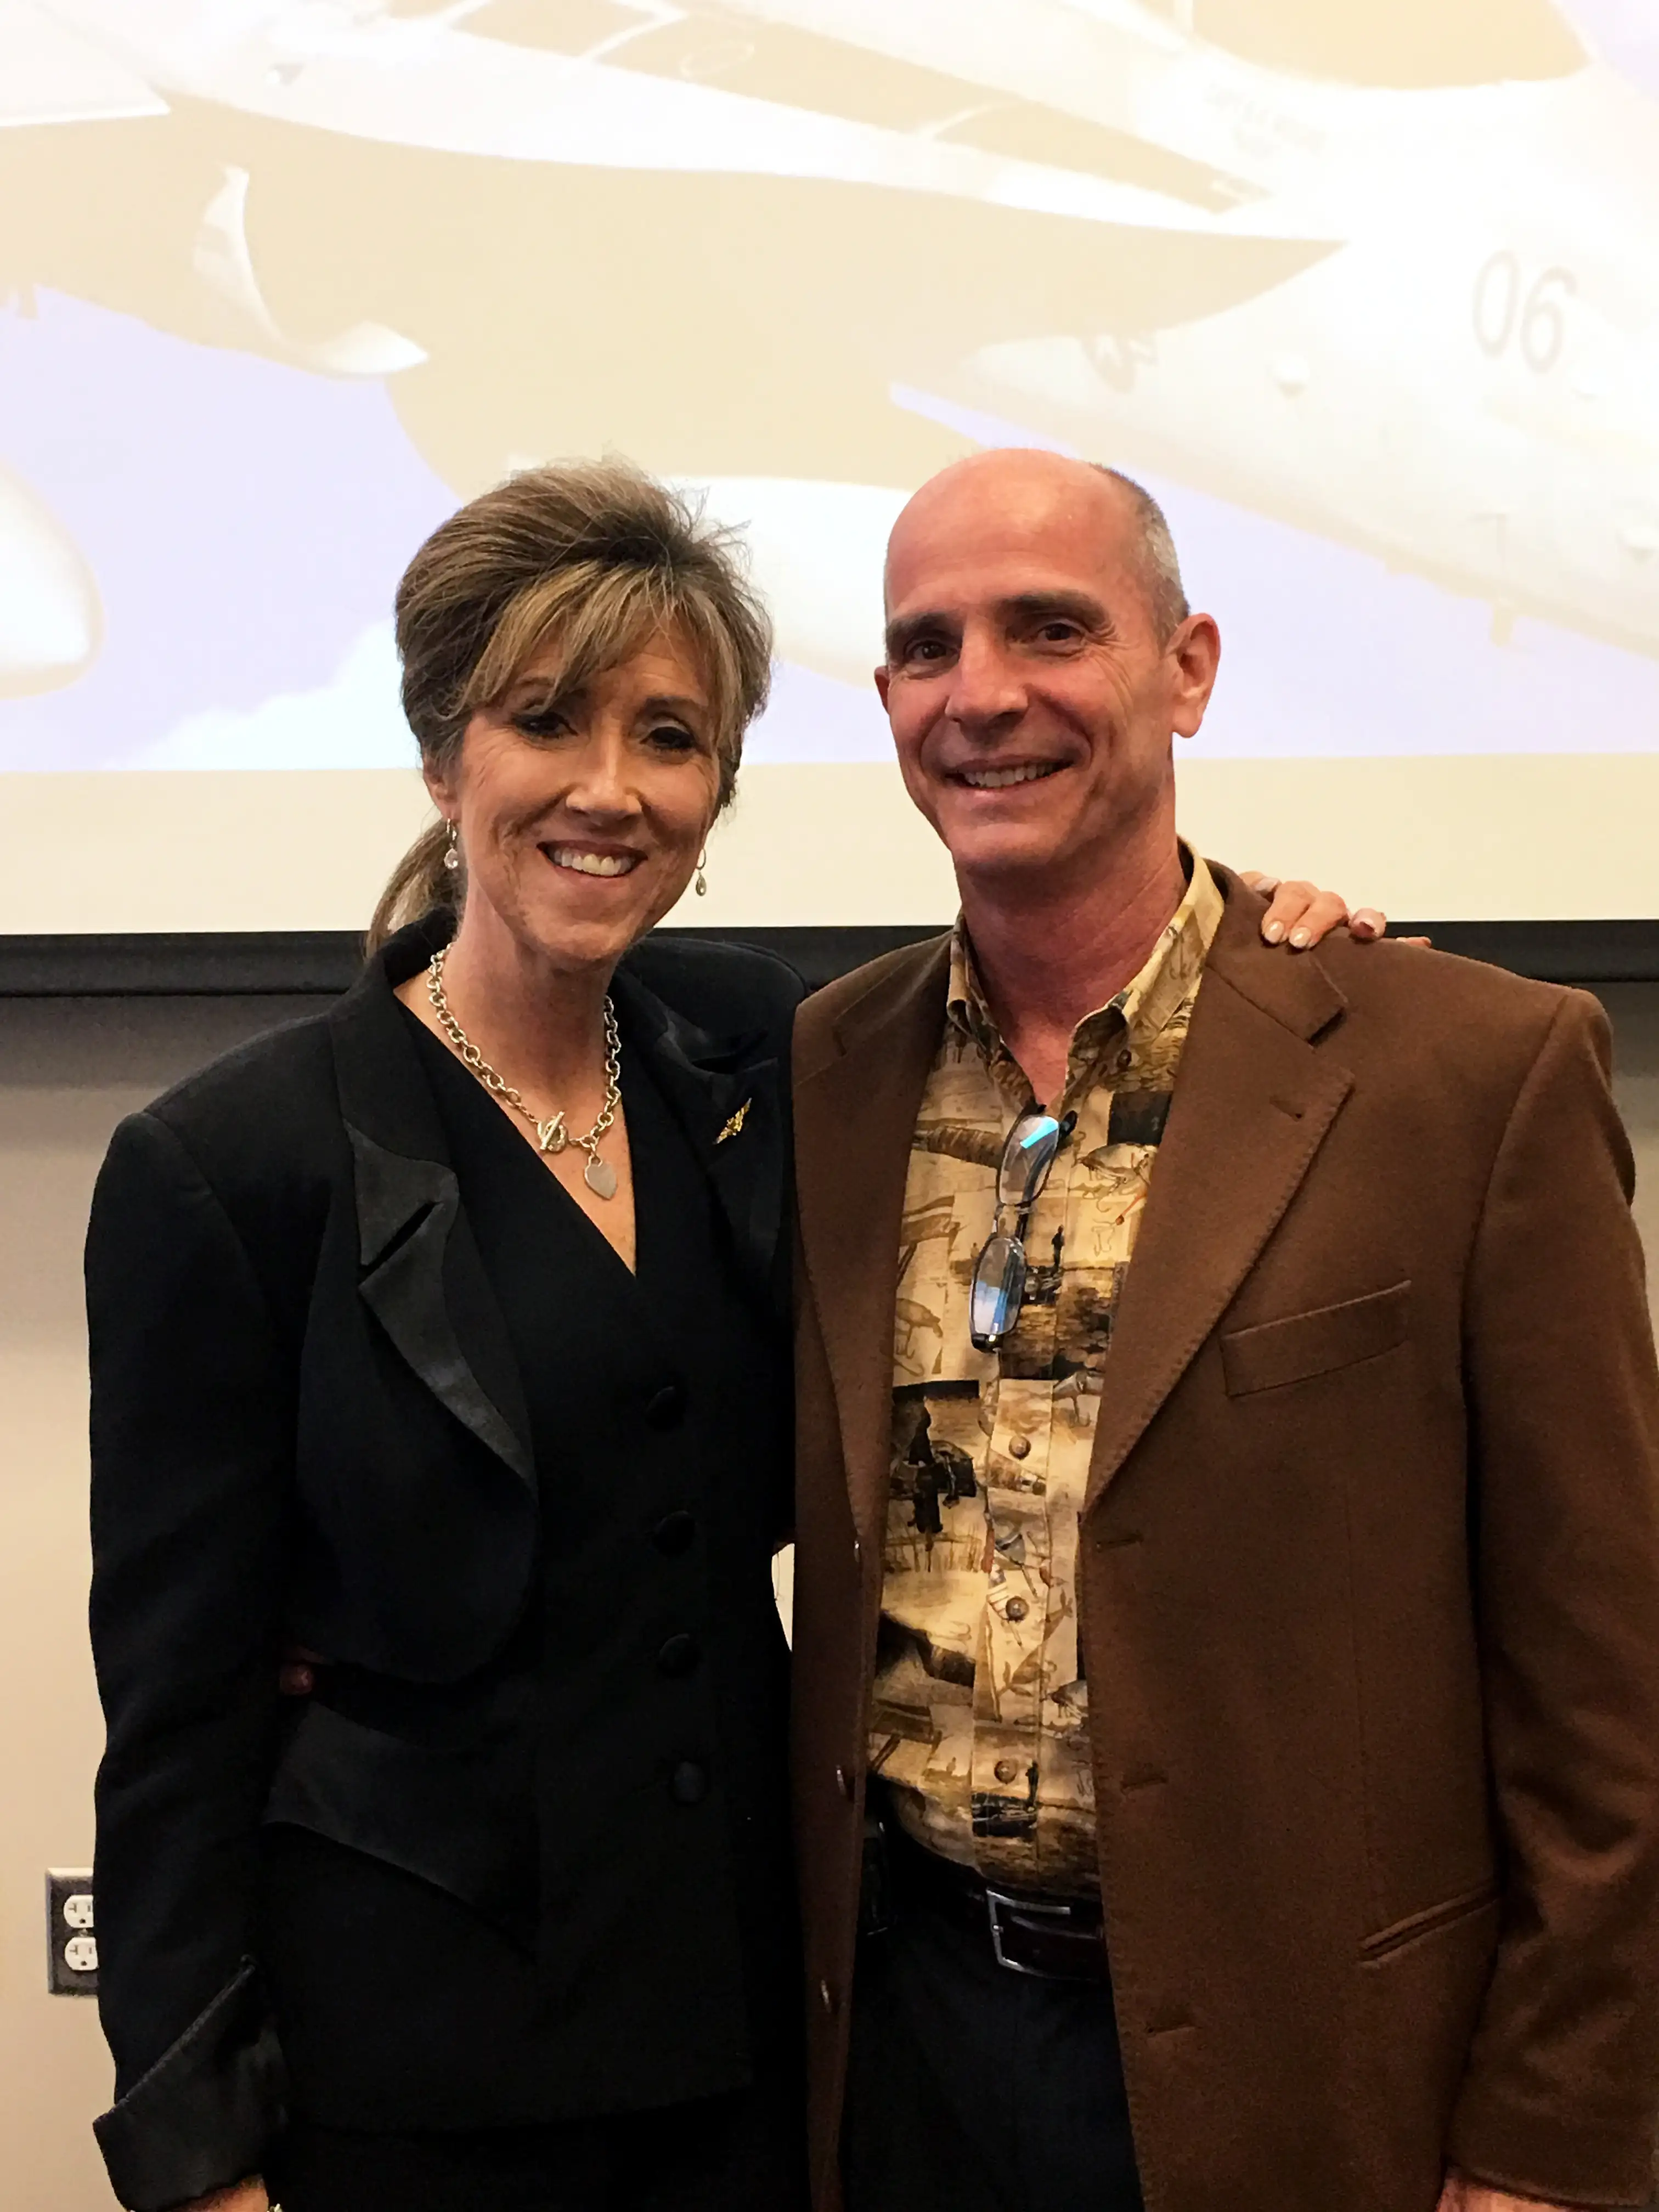 Tammie Jo Shults and her husband Dean Shults pose after she spoke at an event at MidAmerica Nazarene University in March 2017.